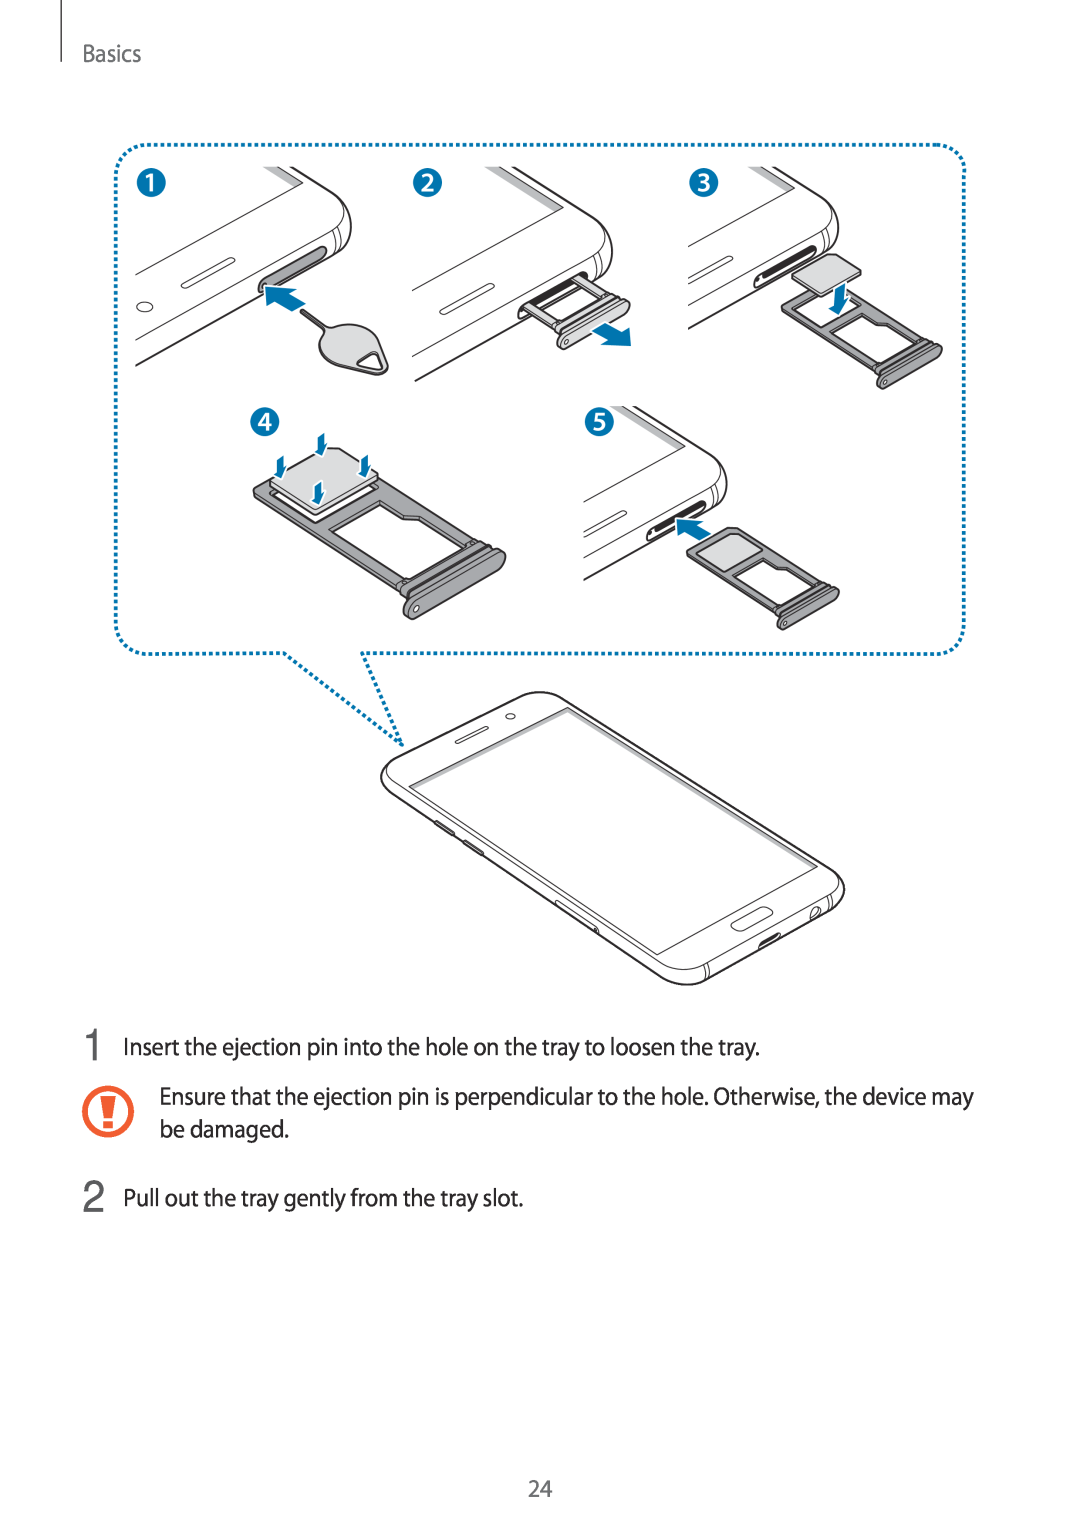 Samsung SM-A320FZINPHE manual Basics, Insert the ejection pin into the hole on the tray to loosen the tray, be damaged 